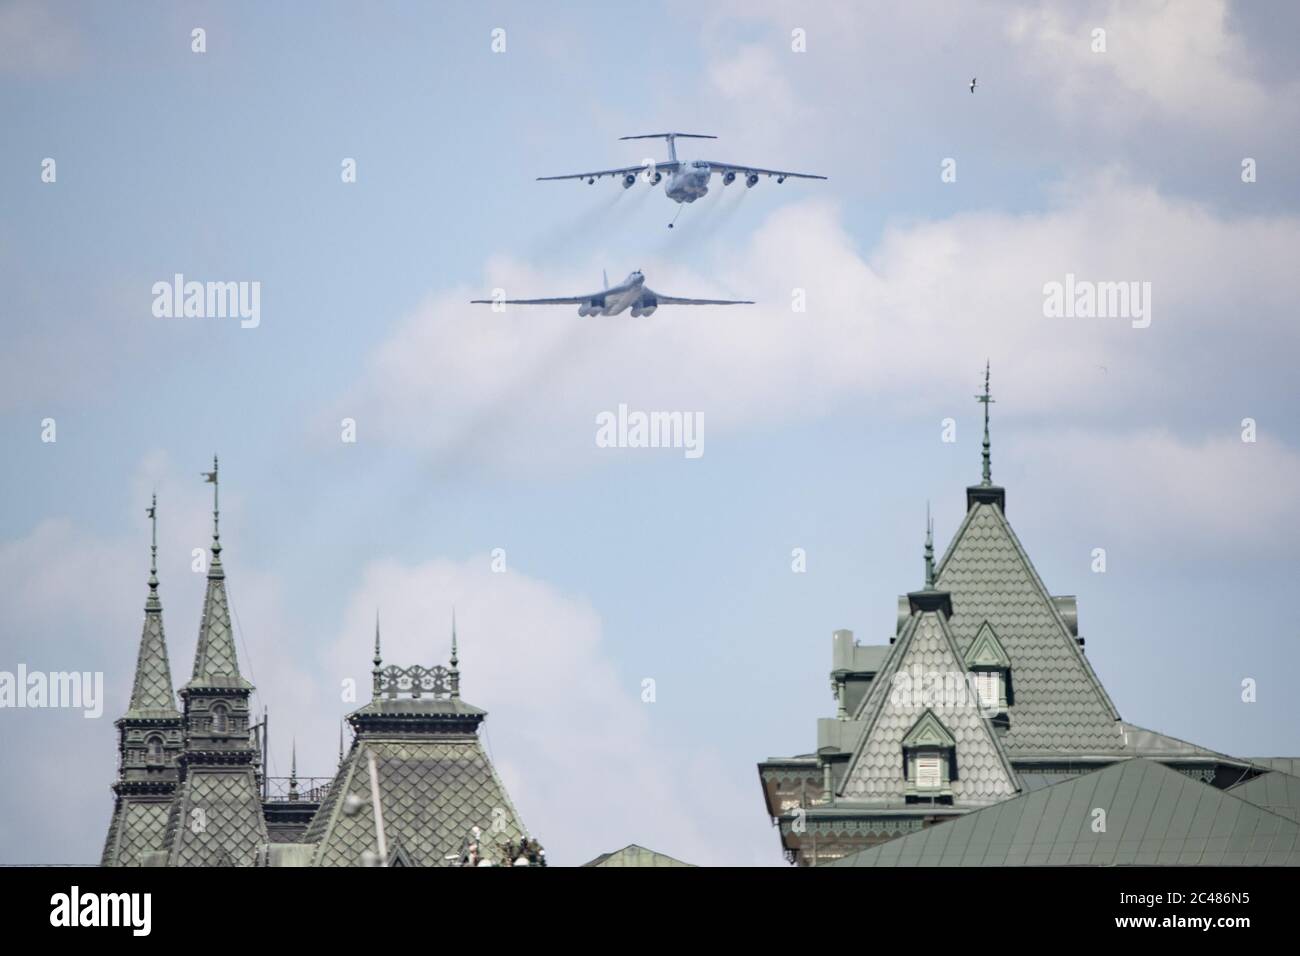 Moscow, Russia. 24th June, 2020. An Il-78 air tanker and a Tu-160 strategic bomber fly over the Red Square during the military parade marking the 75th anniversary of the victory in the Great Patriotic War in Moscow, Russia, on June 24, 2020. Credit: Alexander Zemlianichenko Jr/Xinhua/Alamy Live News Stock Photo